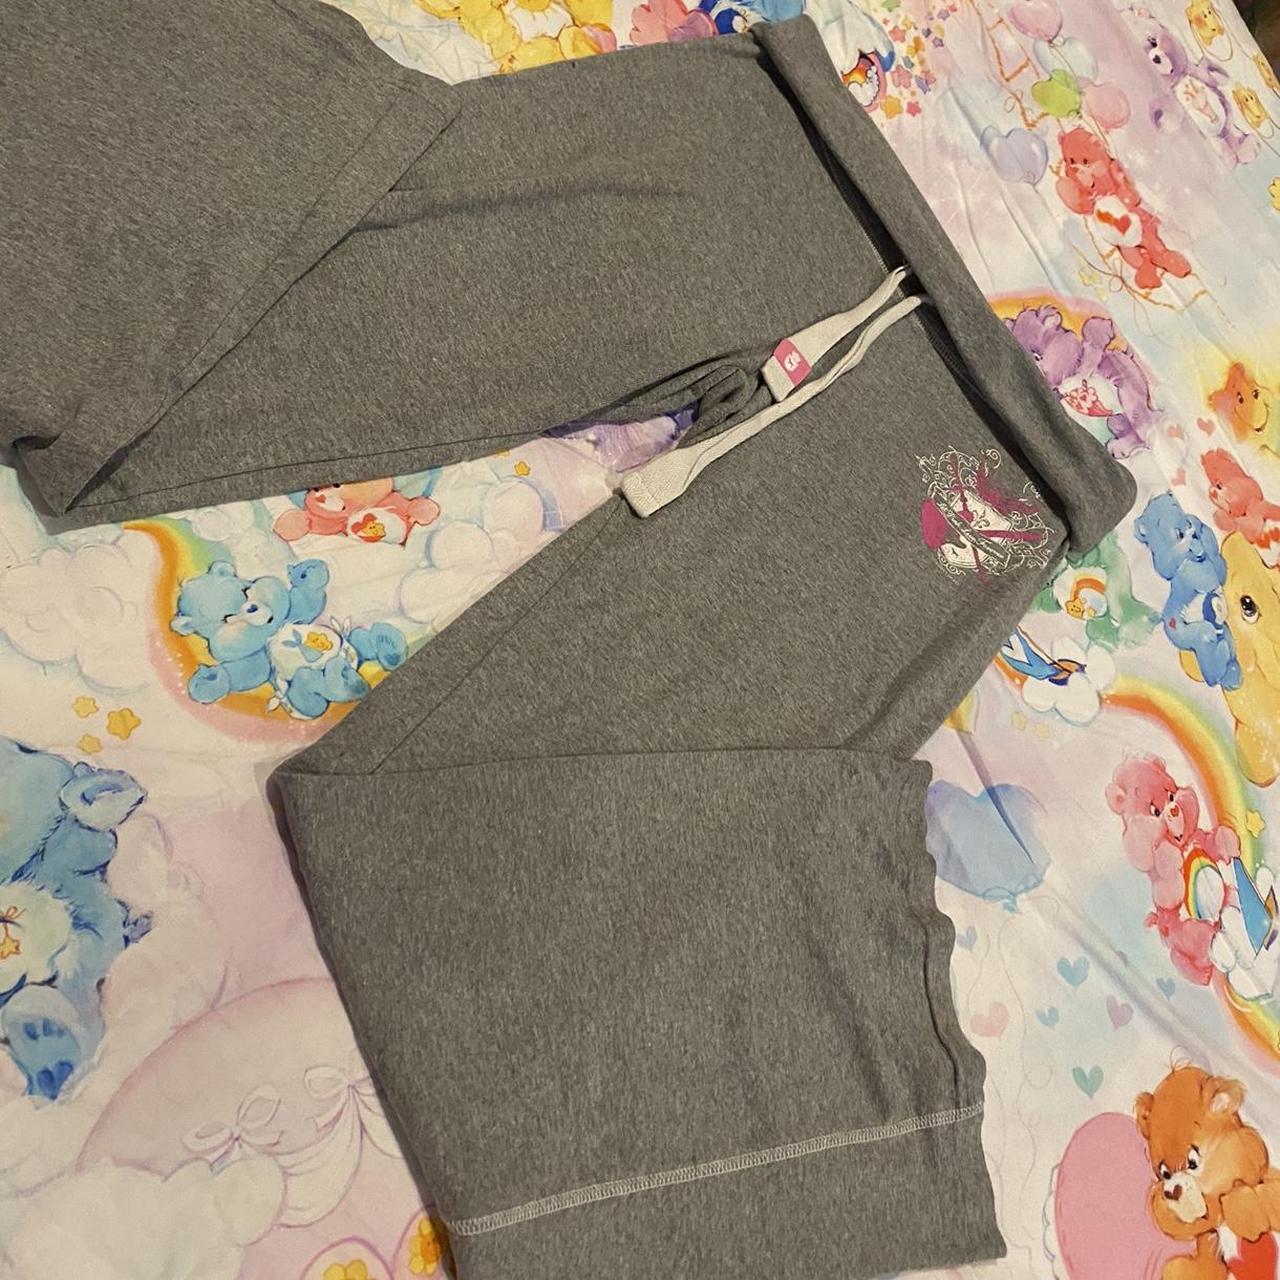 Victoria's Secret Women's Grey and Pink Joggers-tracksuits (3)